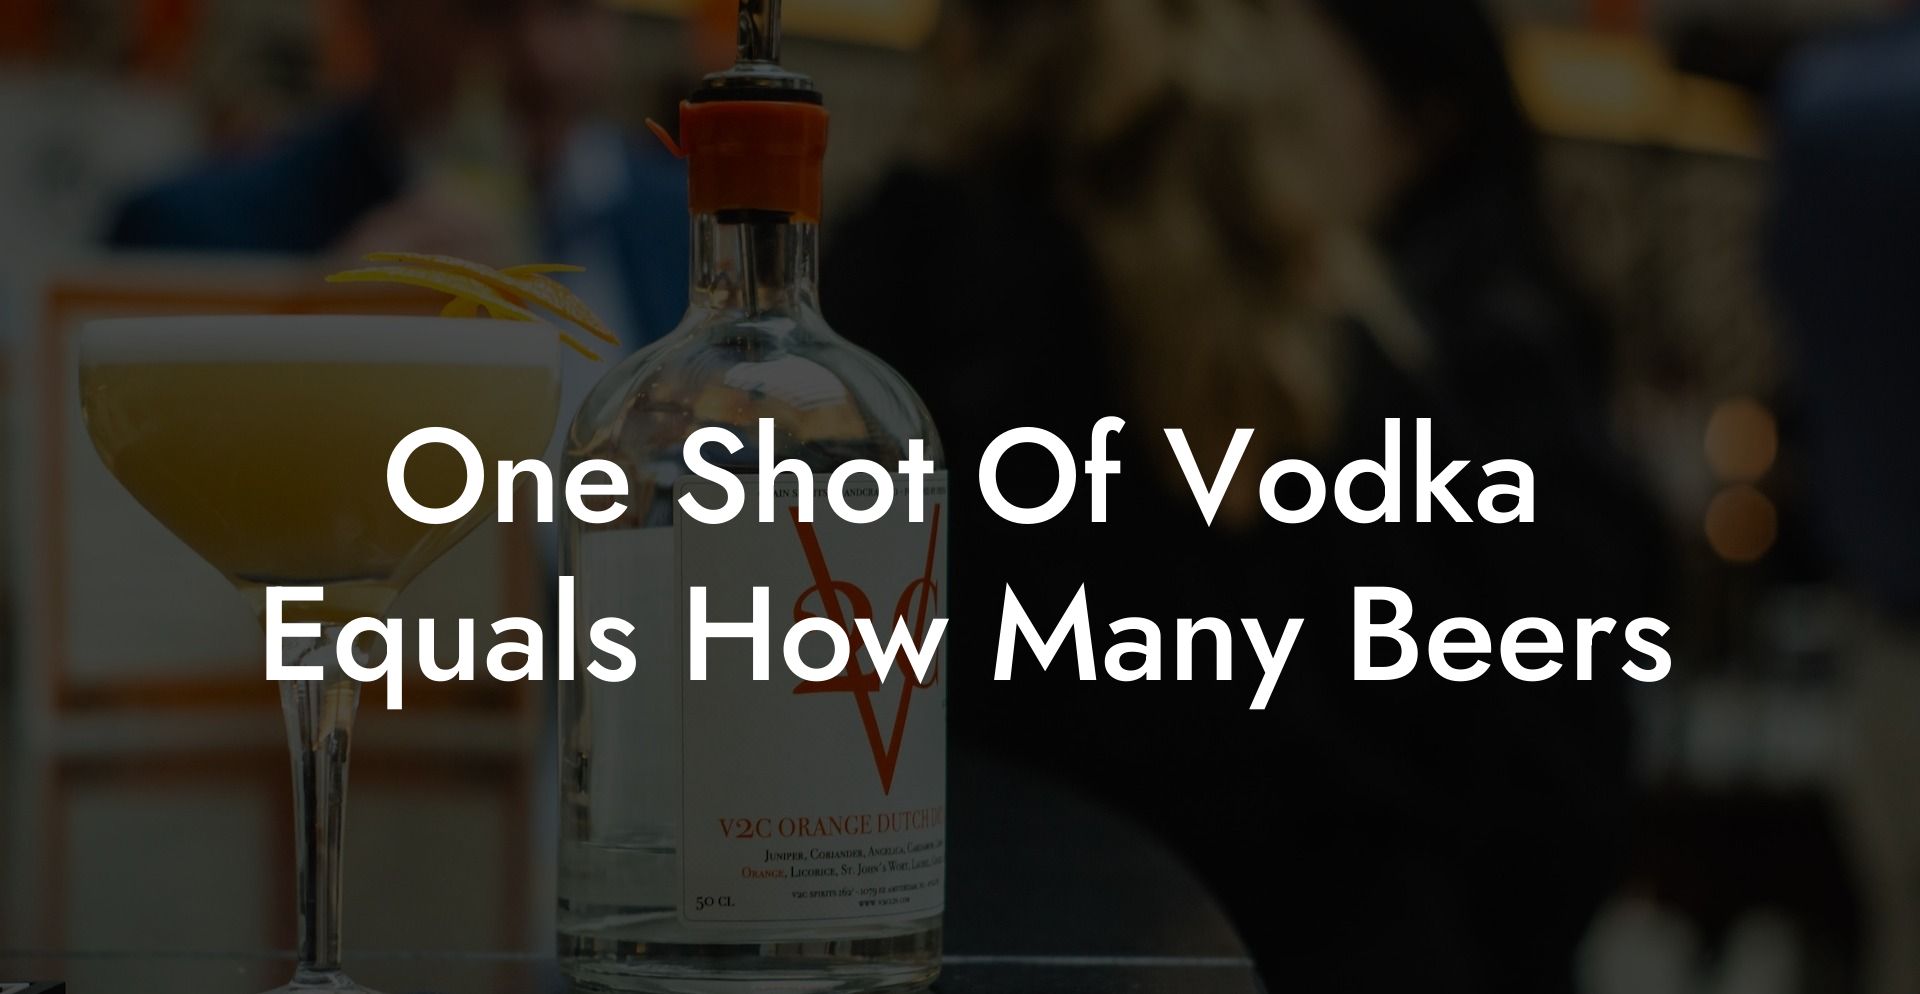 One Shot Of Vodka Equals How Many Beers